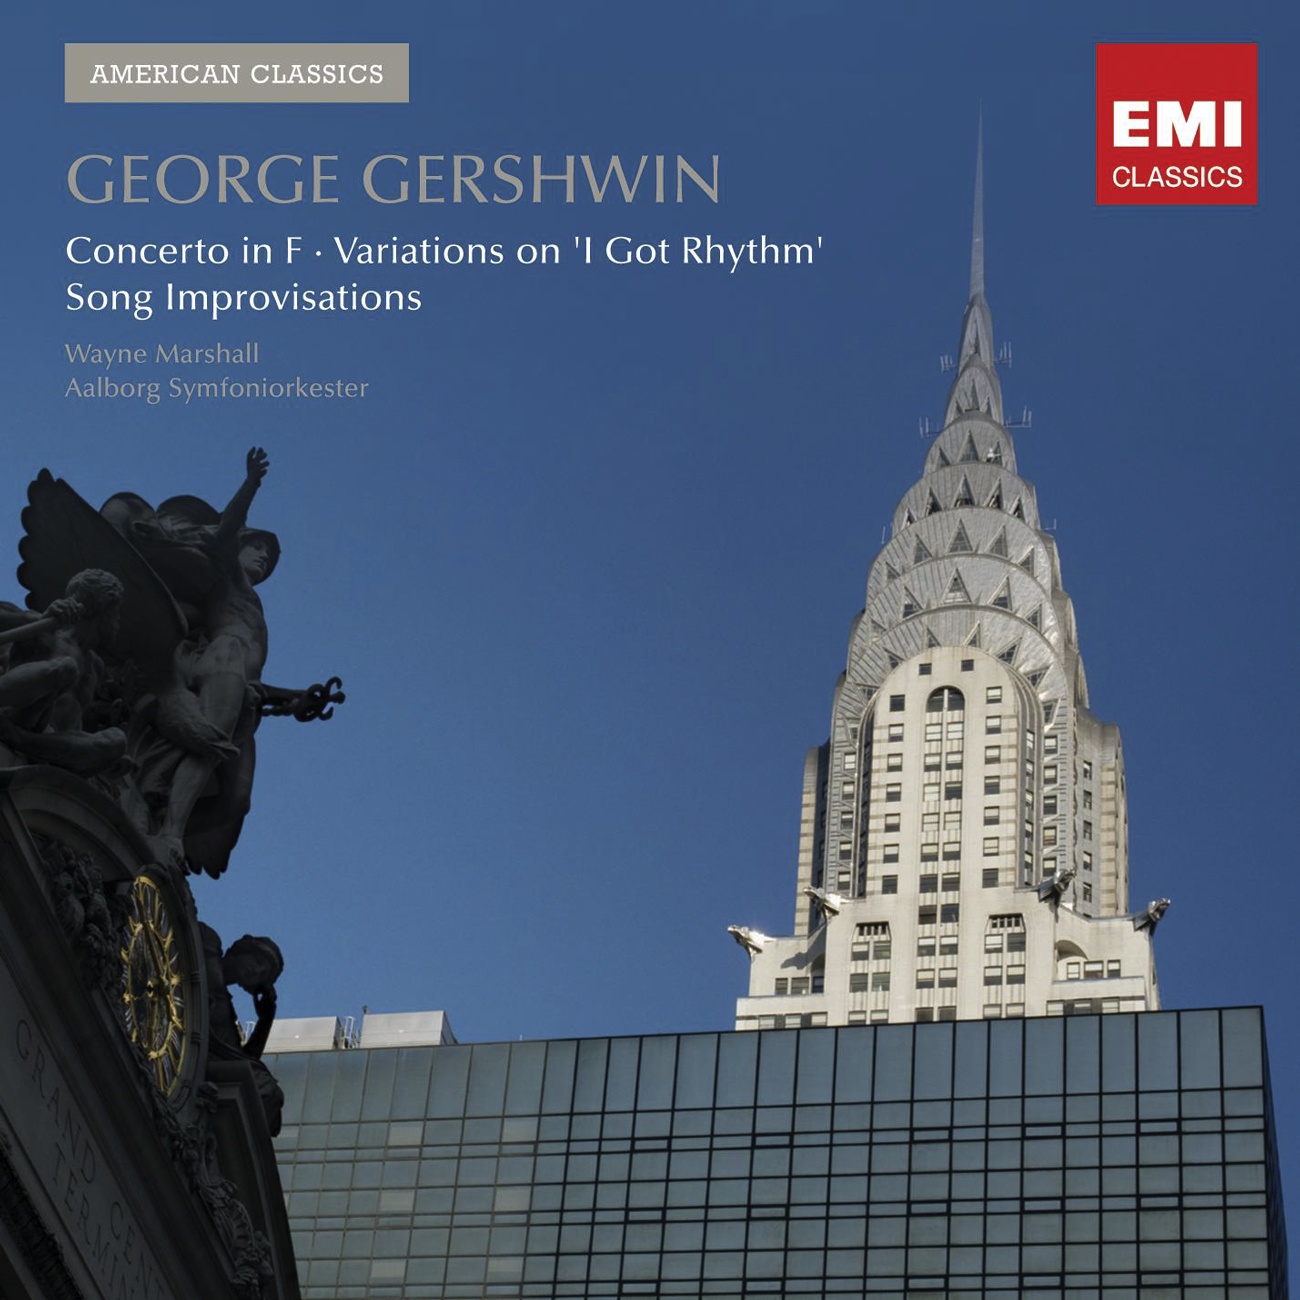 A Gershwin Songbook: improvisations on songs by George Gershwin: Our love is here to stay (Goldwyn Follies)